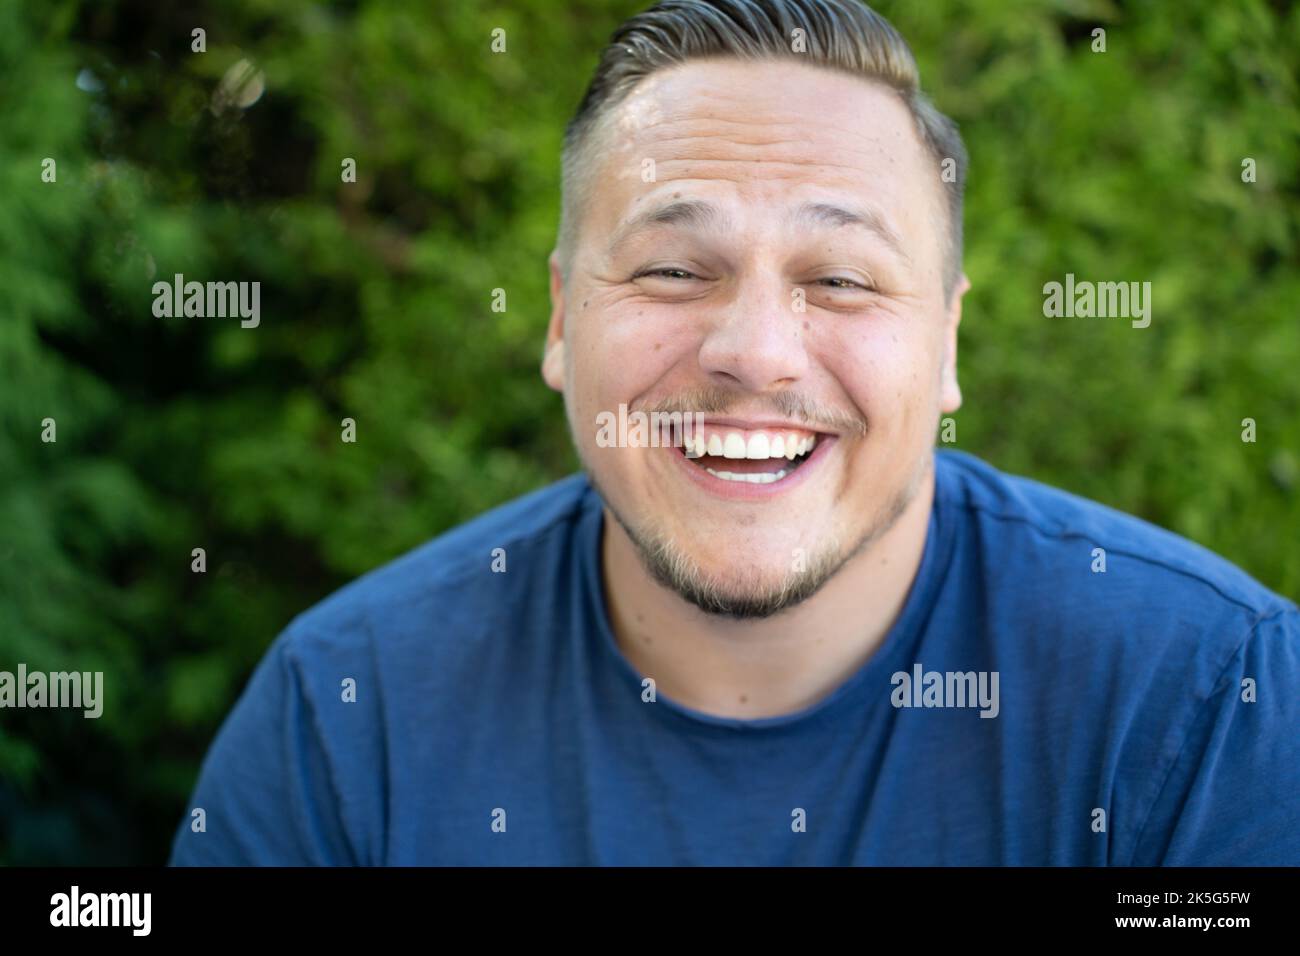 Young man enjoying a good joke laughing happily with a beaming smile in close up Stock Photo